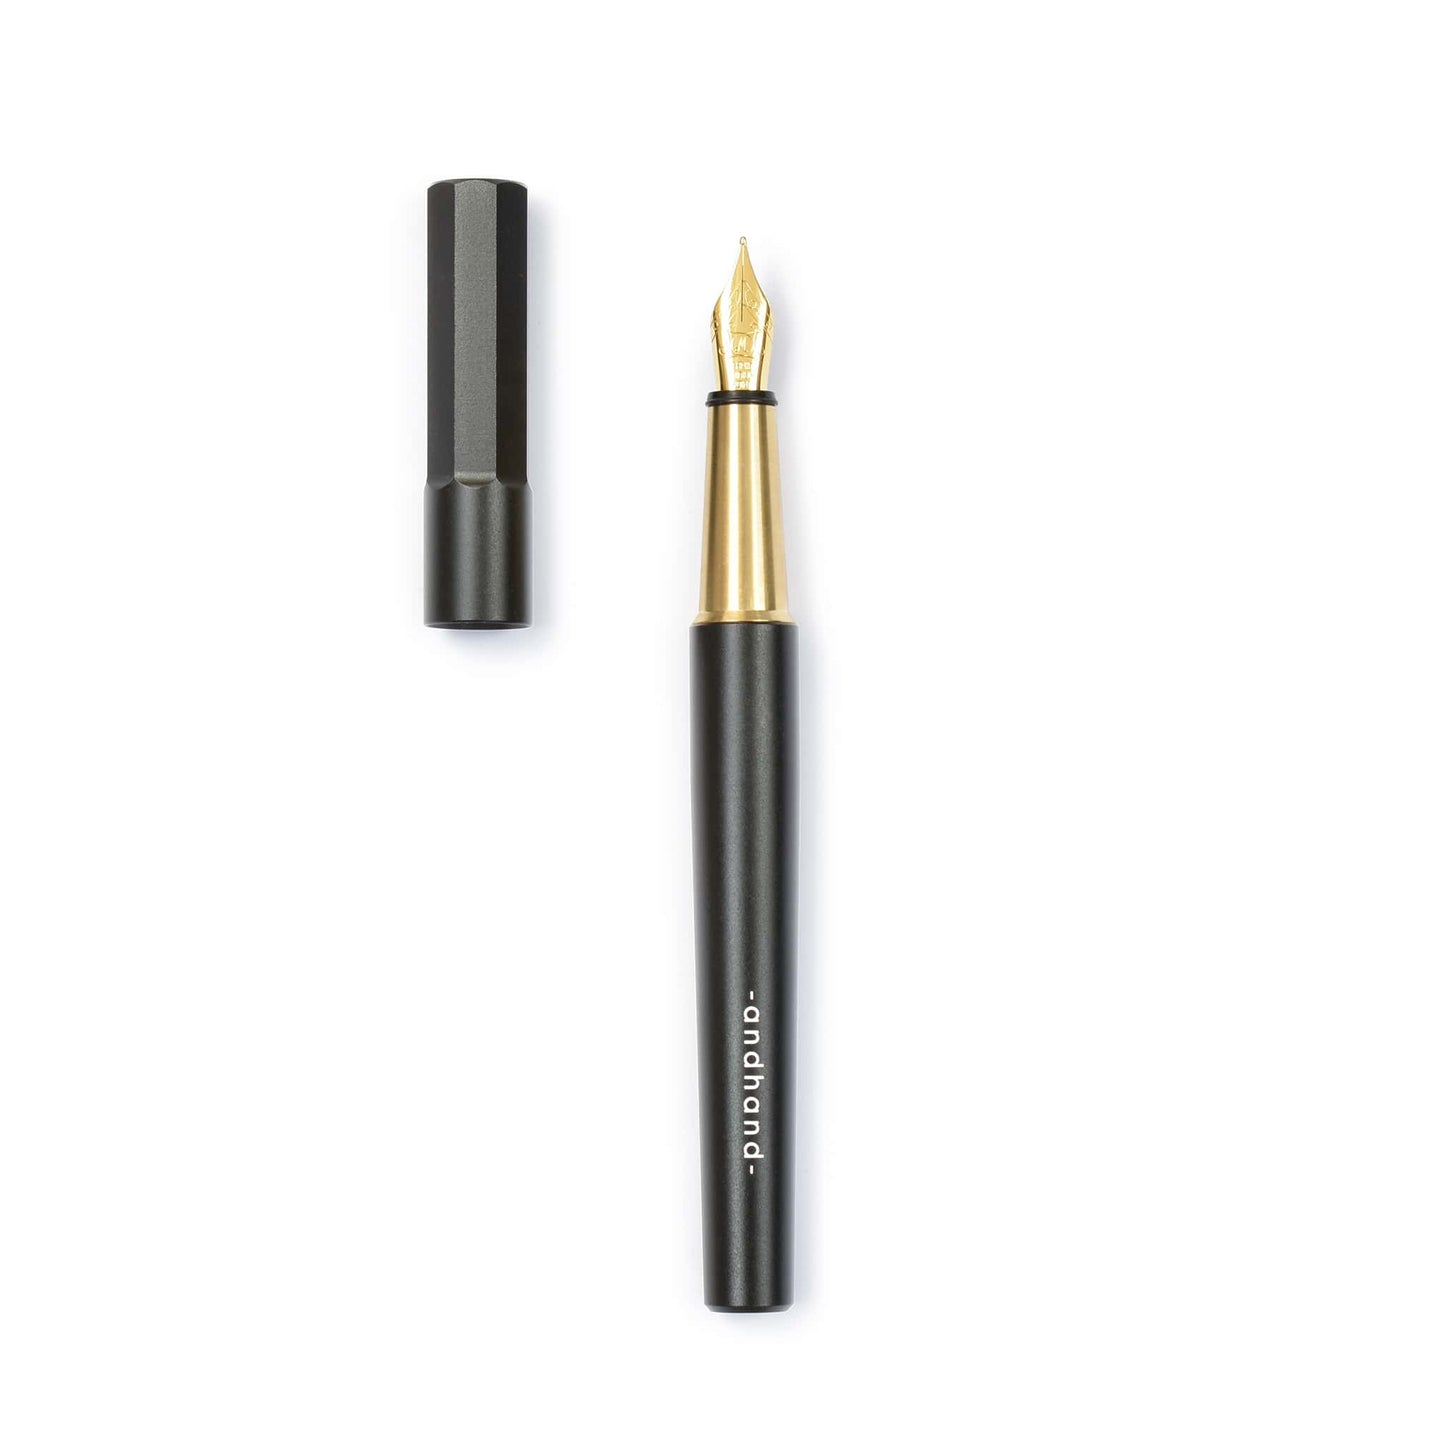 Method Fountain Pen in Black + Brass by Andhand. Brass and aluminium pen with gold plated nib. Ideal fountain pen for writing, lightweight and sleek design.